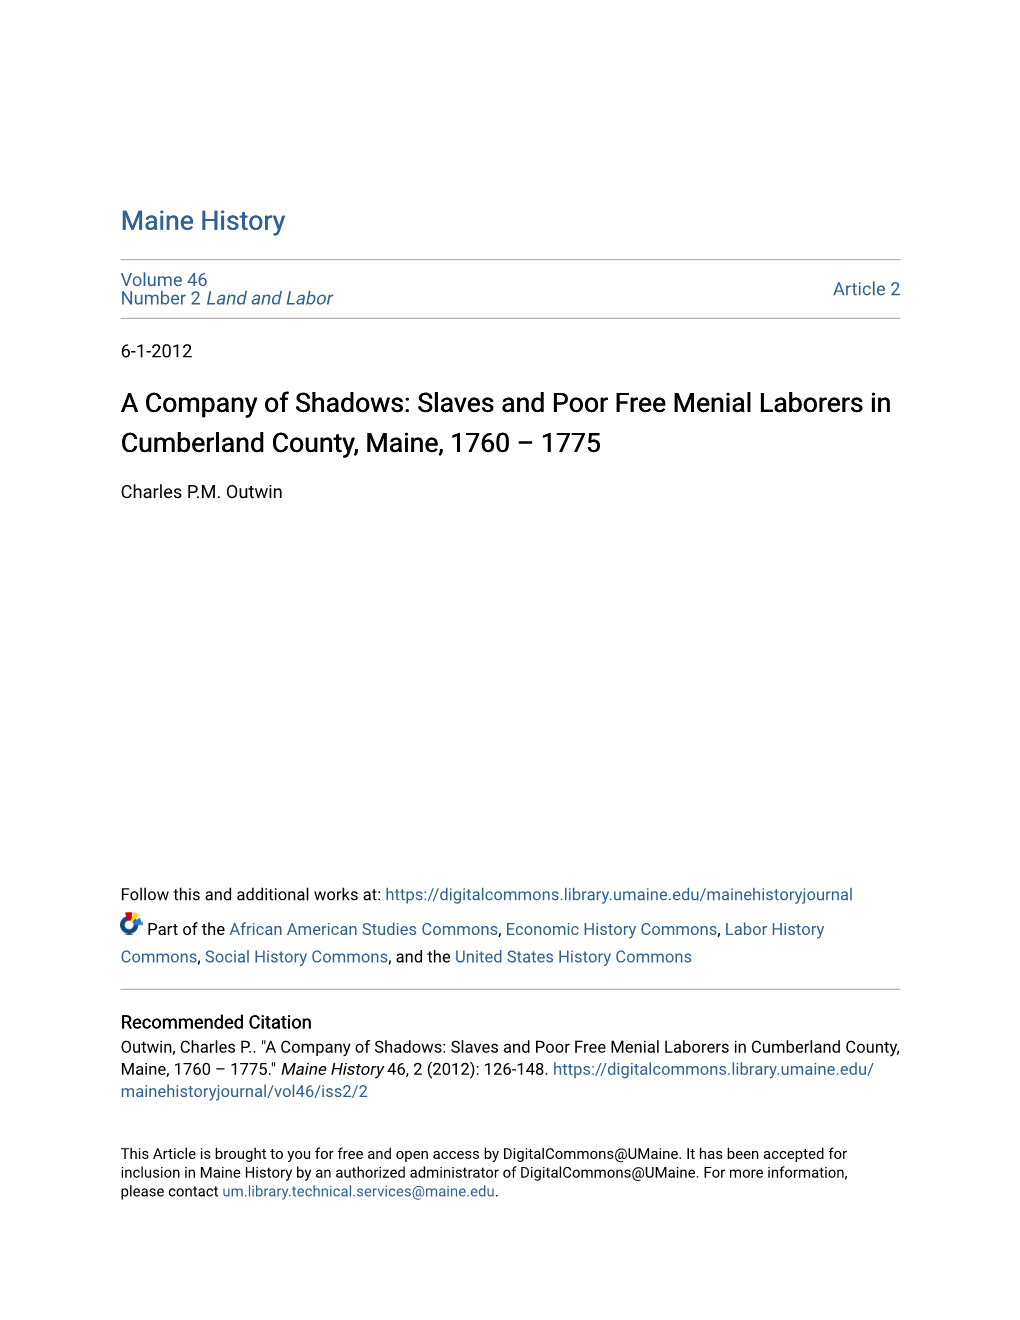 A Company of Shadows: Slaves and Poor Free Menial Laborers in Cumberland County, Maine, 1760 – 1775